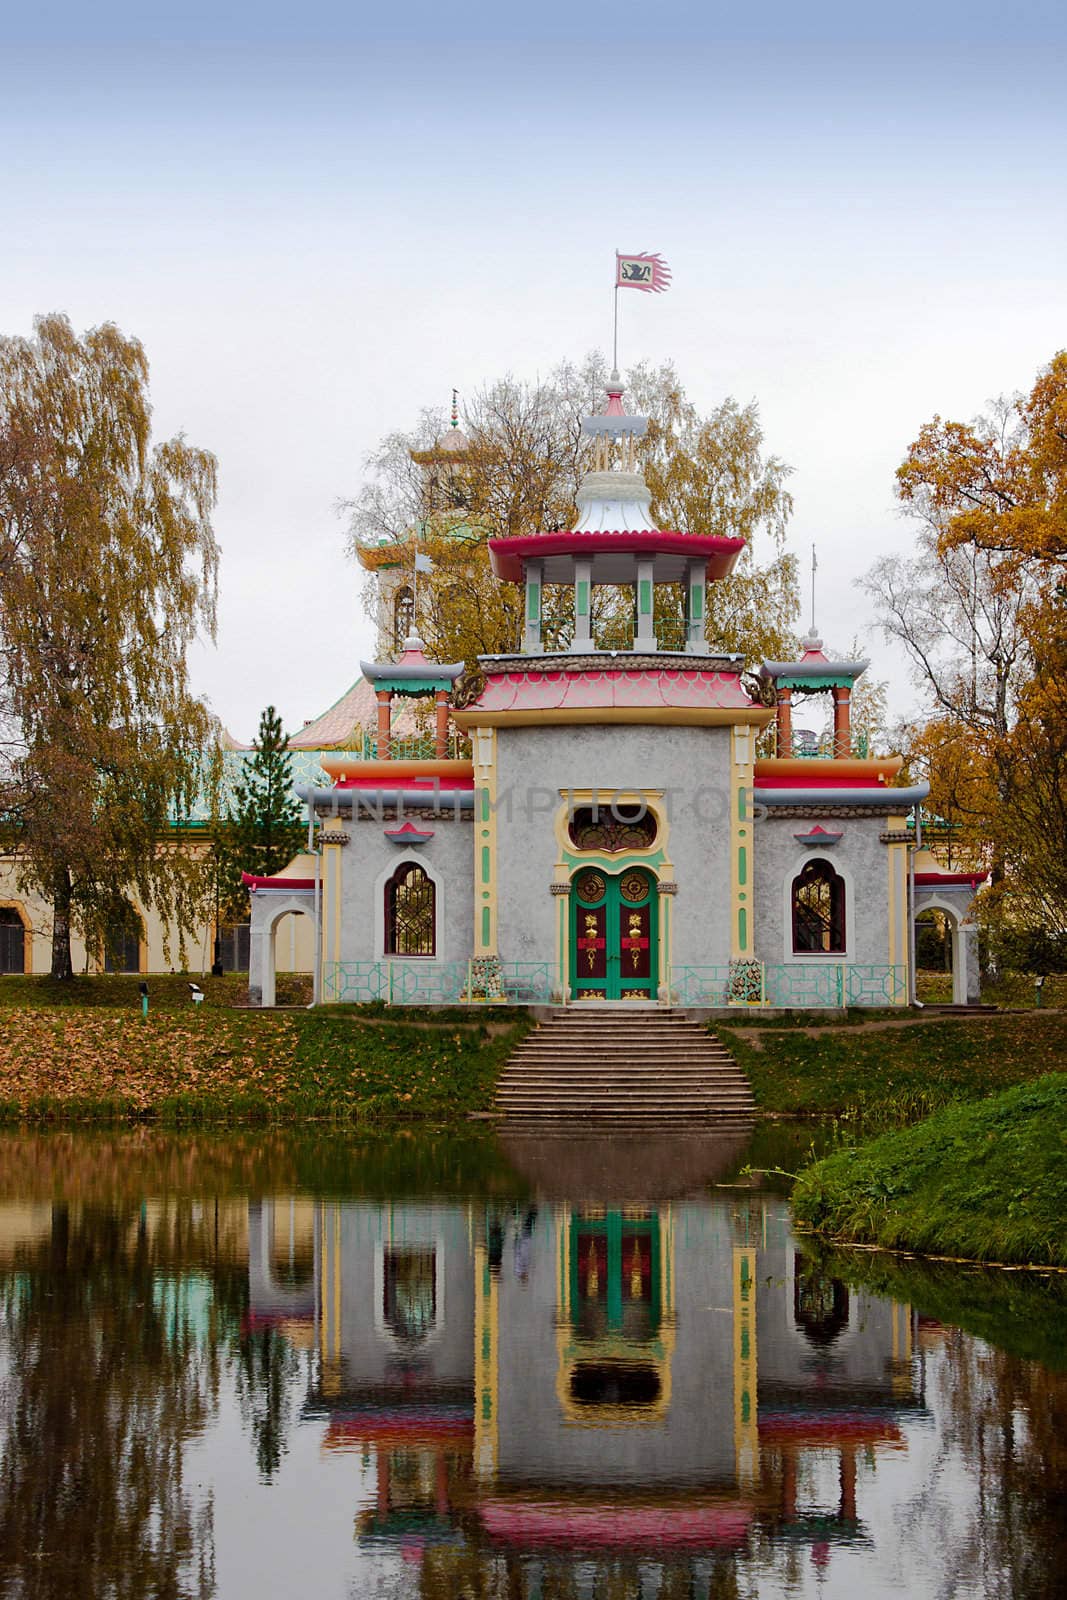 Pavilion in Chinese style in Tsarskoe Selo, Russia, autumn